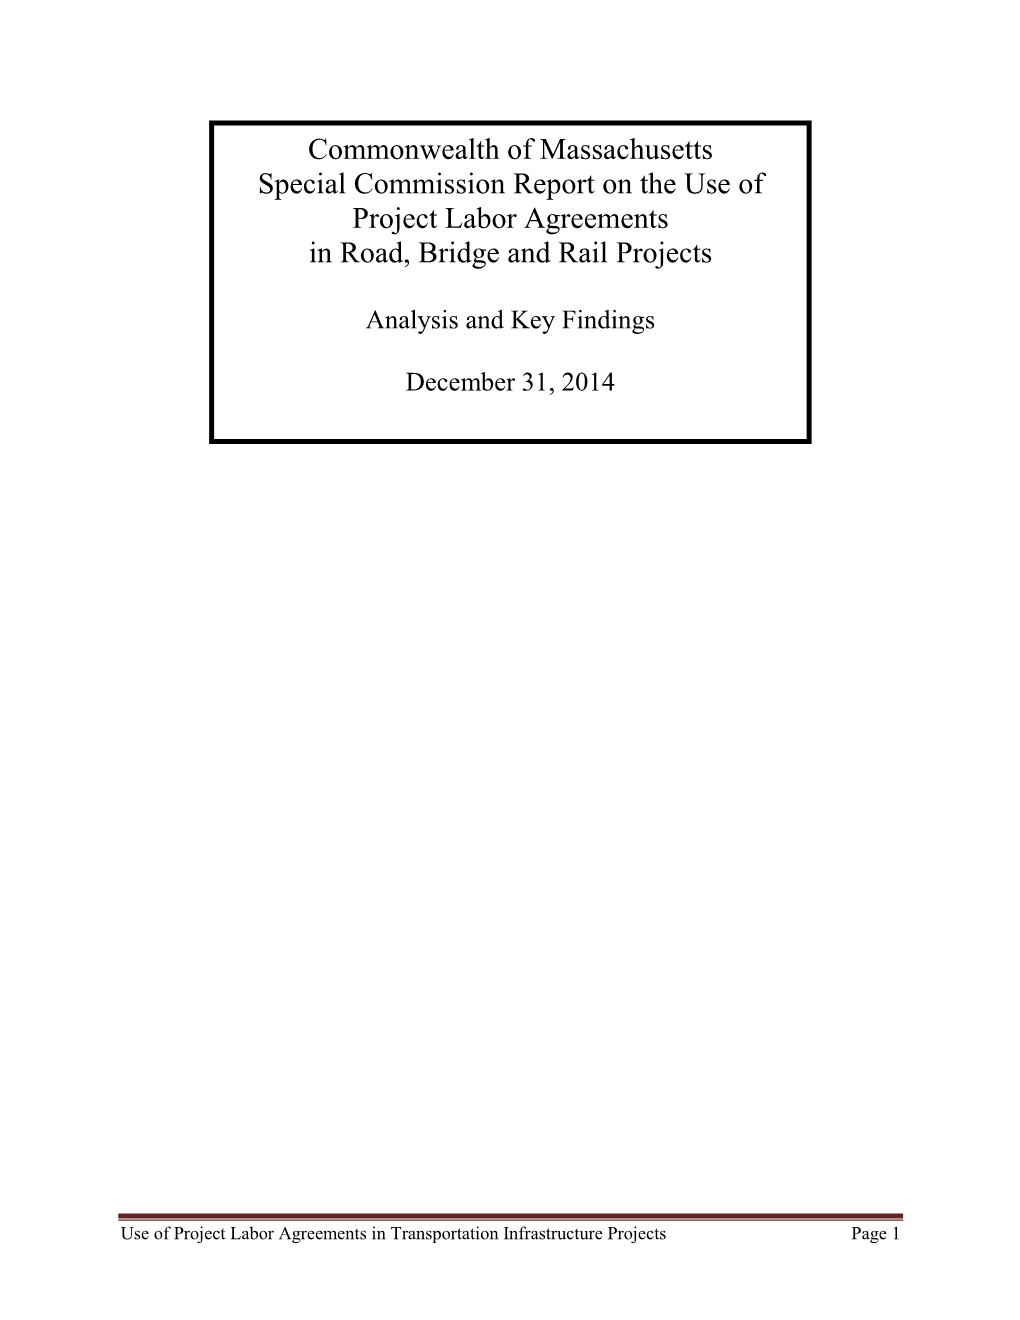 Commonwealth of Massachusetts Special Commission Report on the Use of Project Labor Agreements in Road, Bridge and Rail Projects